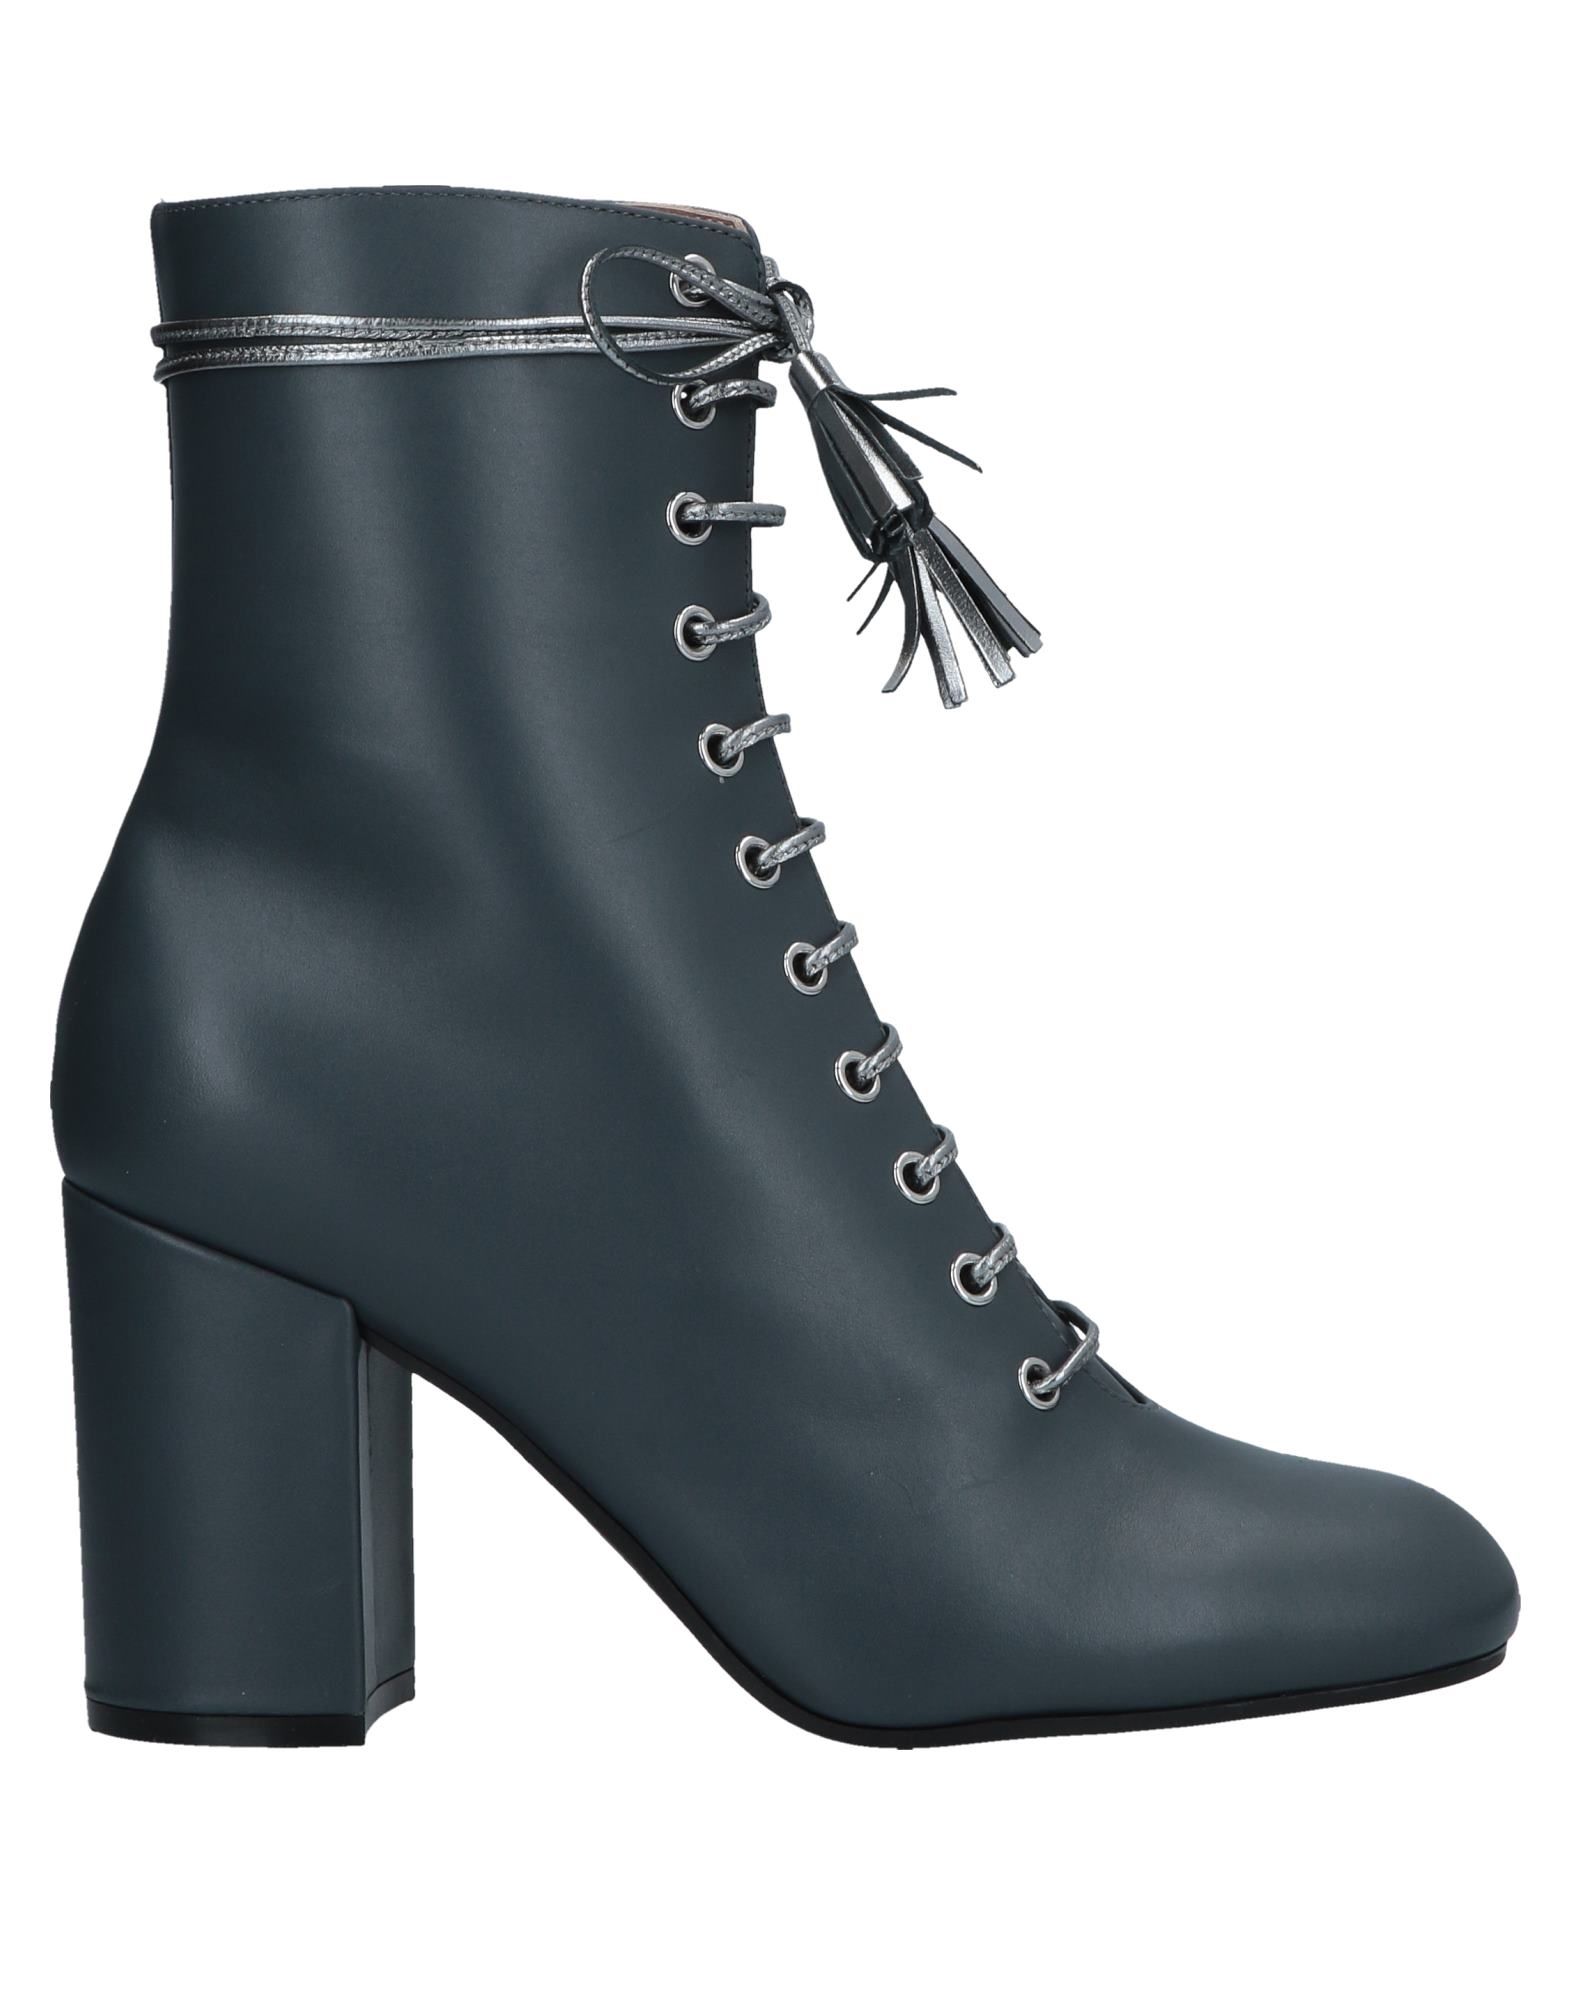 POLLINI Ankle boots - Item 11677558